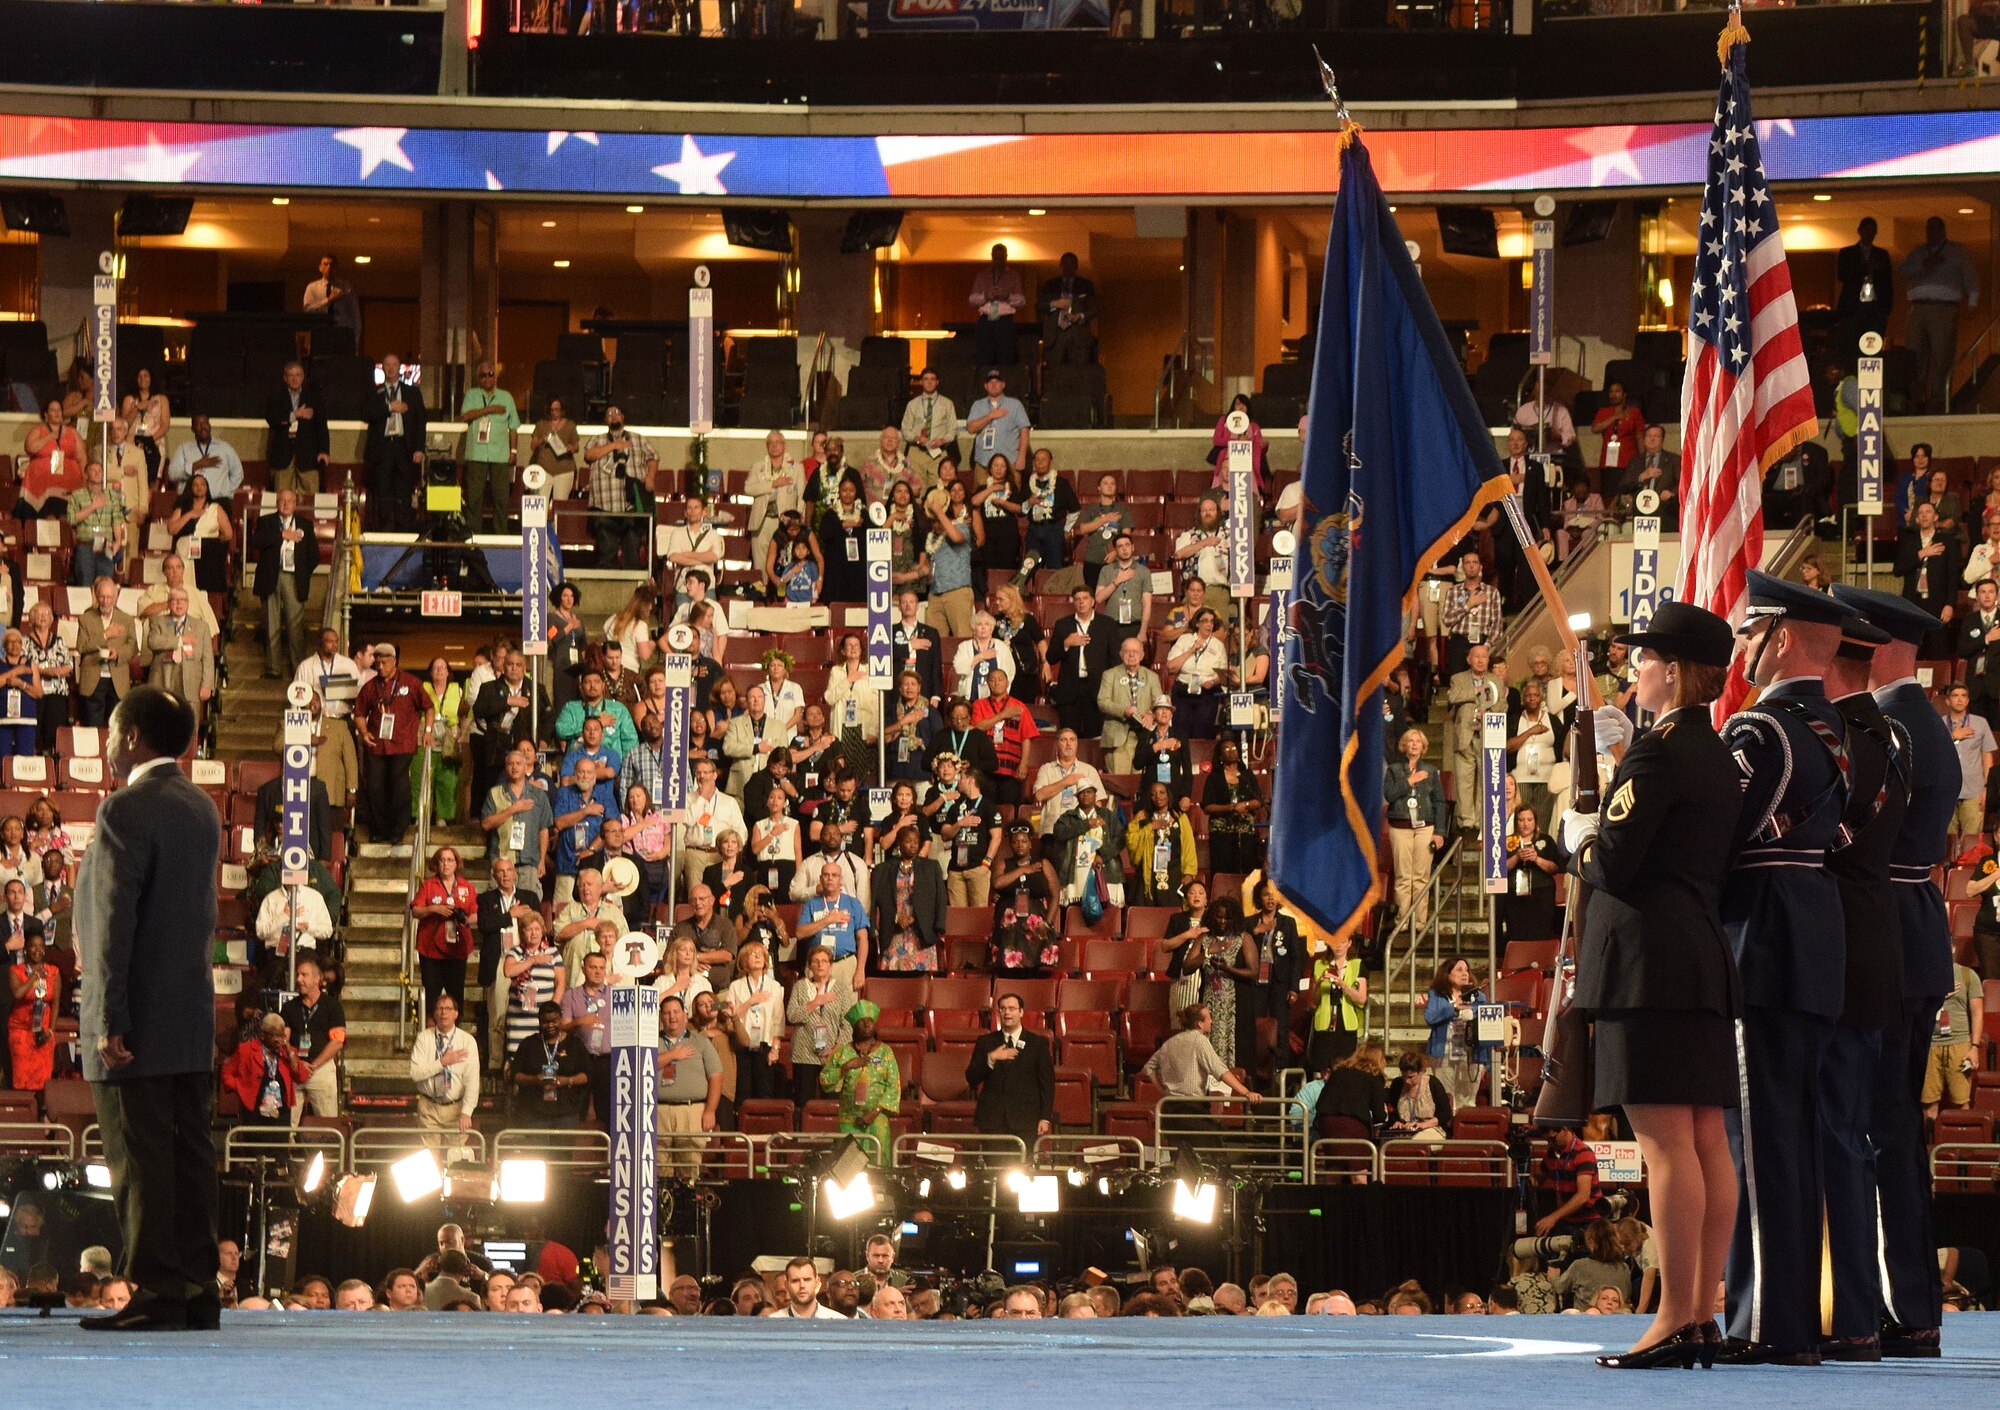 Before thousands of conventioneers at the Democratic National Convention at the Wells Fargo Center in Philadelphia, Pa. July 27, 2016, a dip of the Pennsylvania state flag from the blended service Pennsylvania National Guard Honor Guard detail signals onlookers to recite a heart-felt Pledge of Allegiance. (U.S. Air National Guard photo by Master Sgt. Chris Botzum)